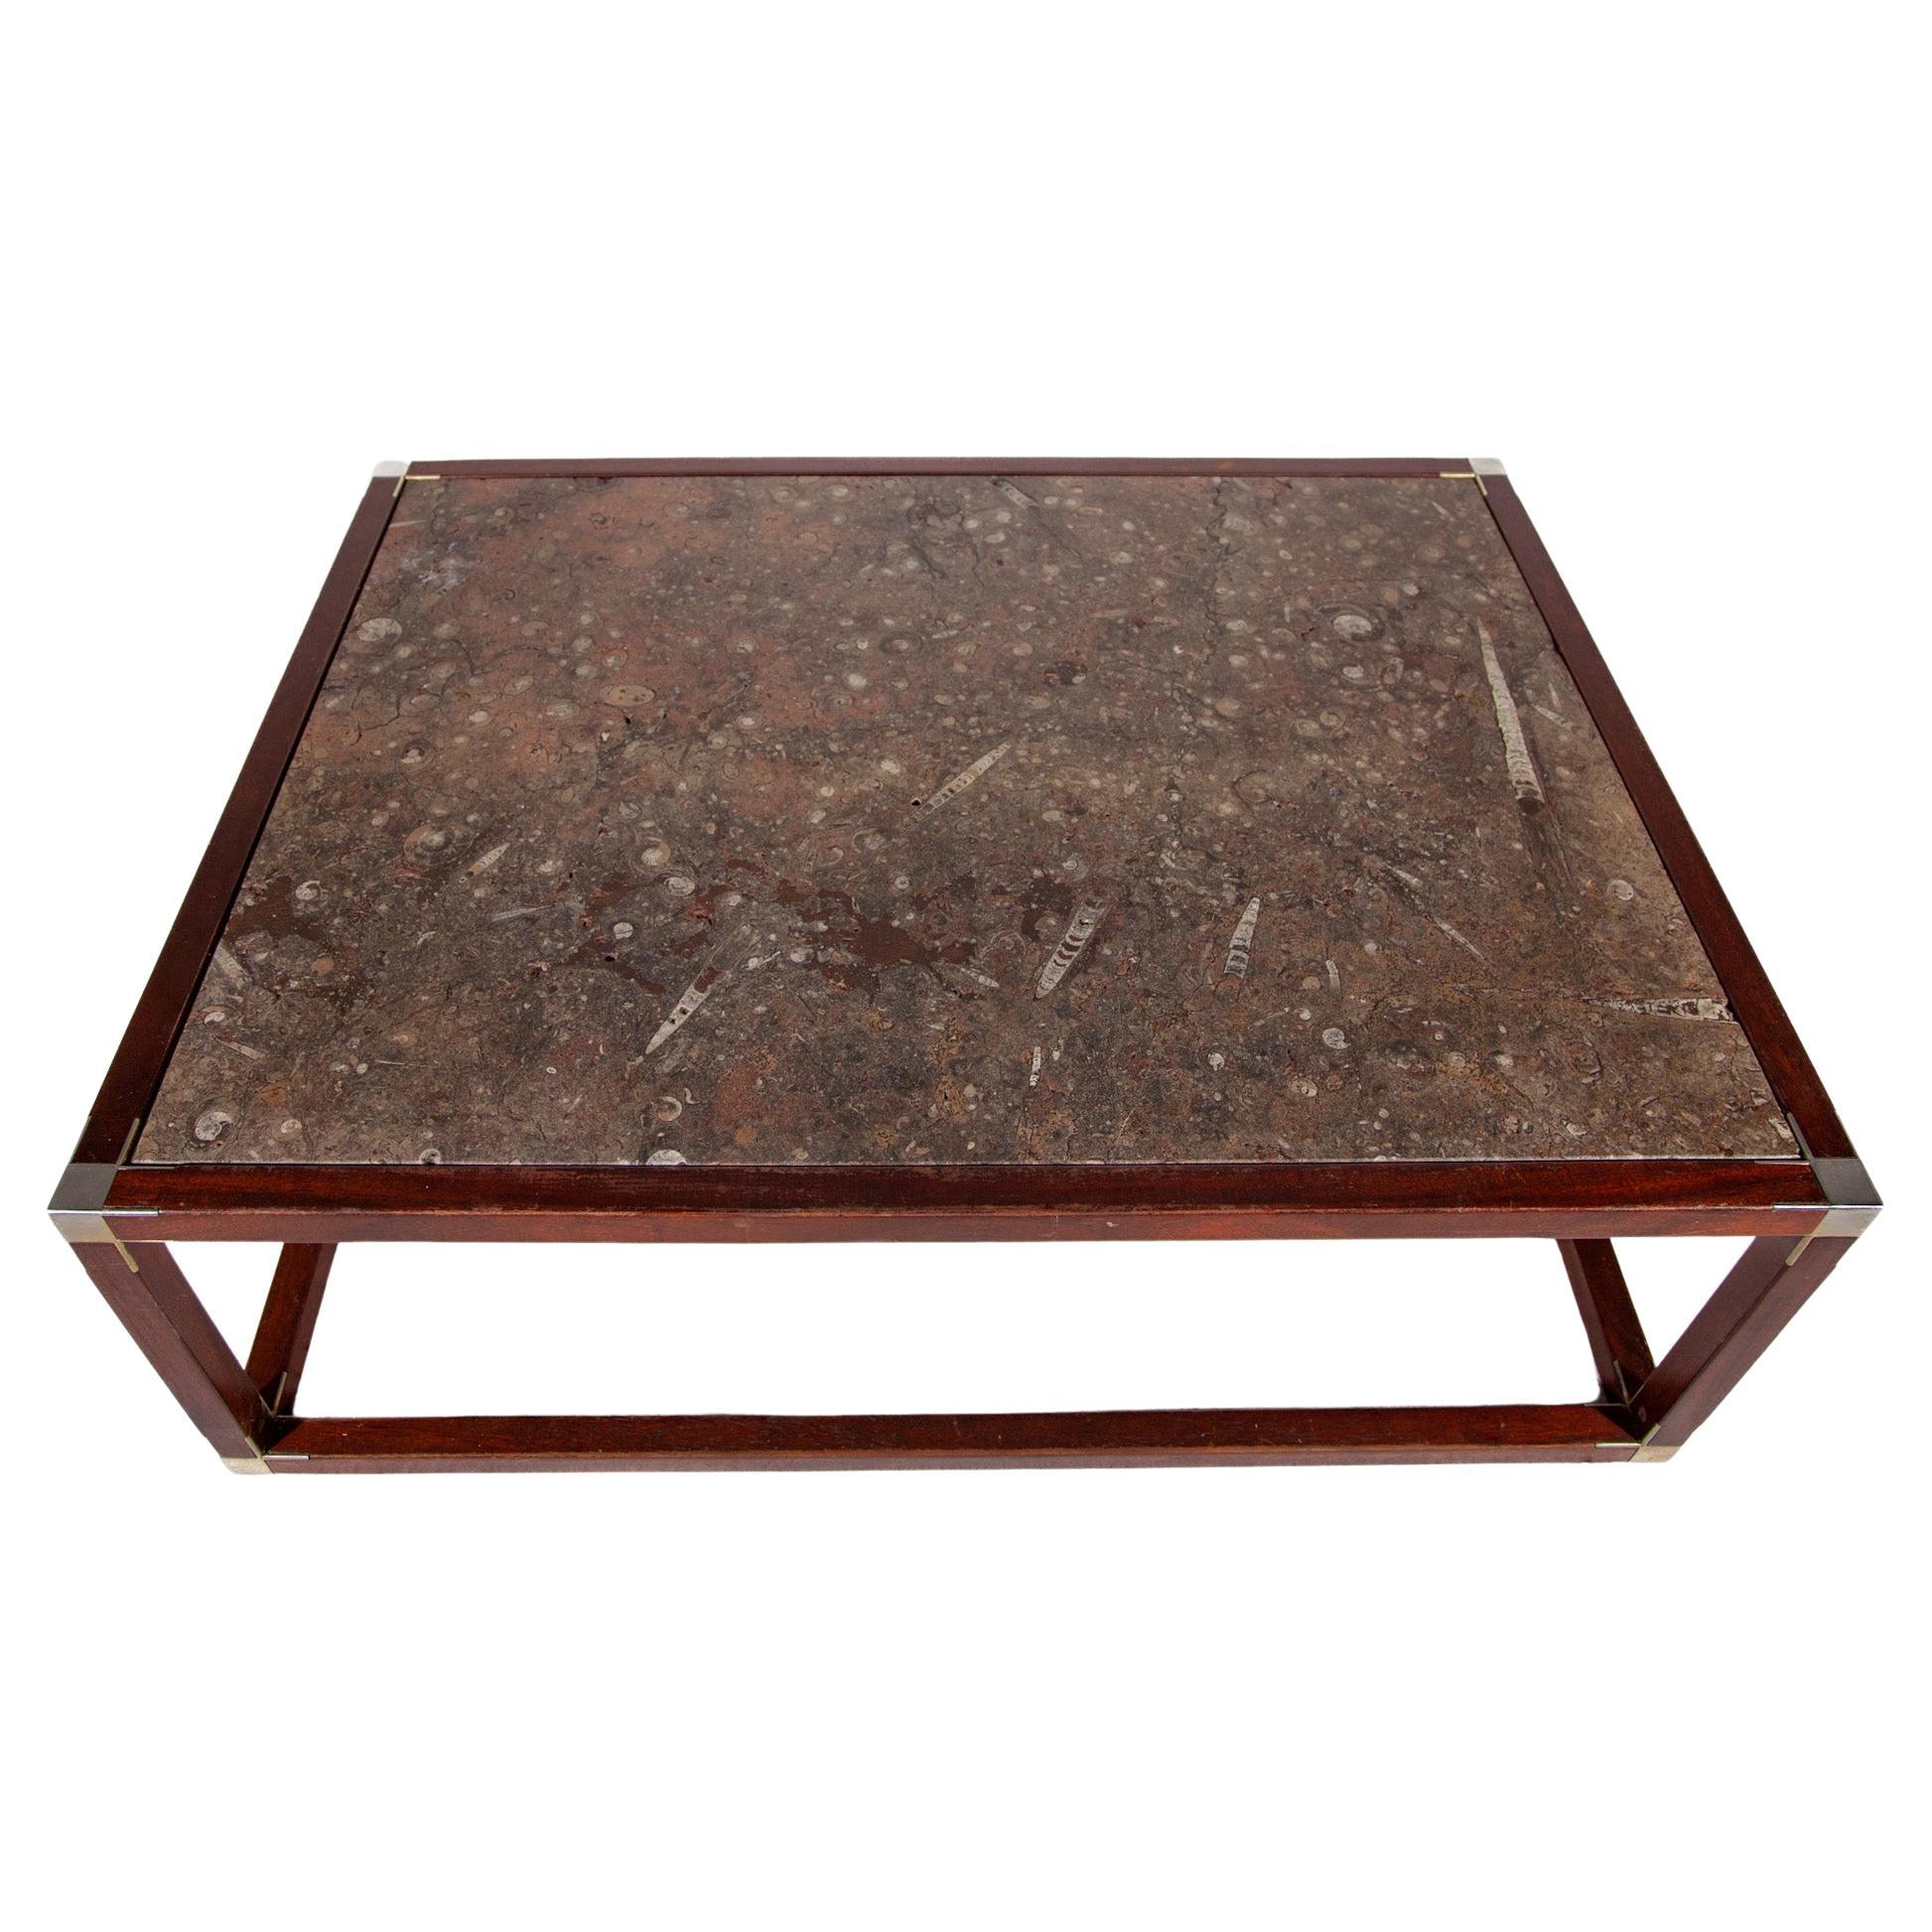 Art Deco Large Coffee Table with Old Fossil Stone Top, France